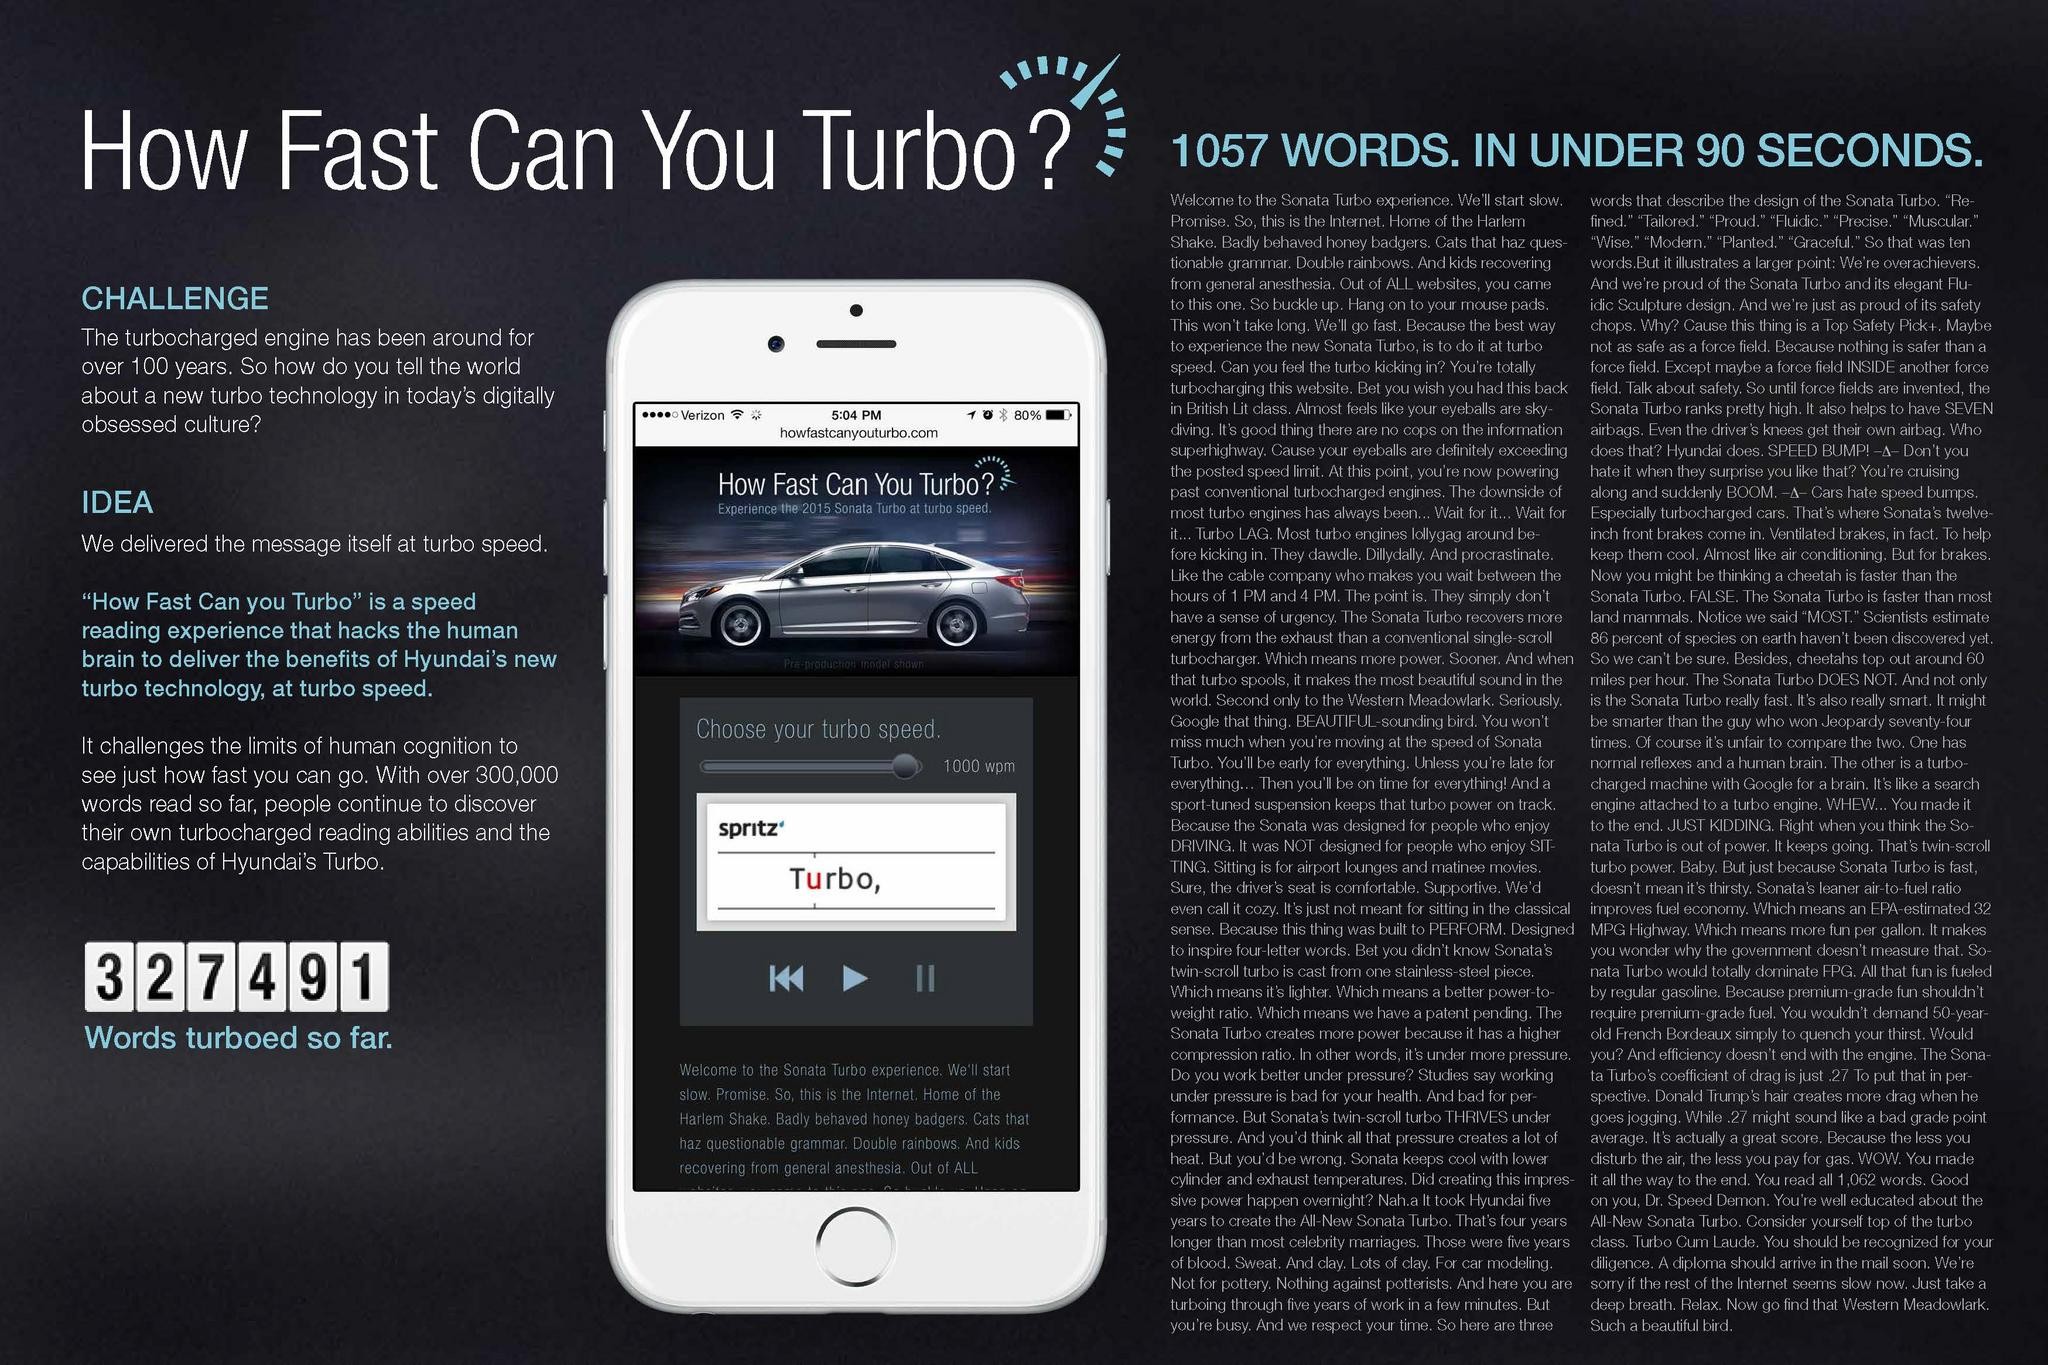 HOW FAST CAN YOU TURBO?